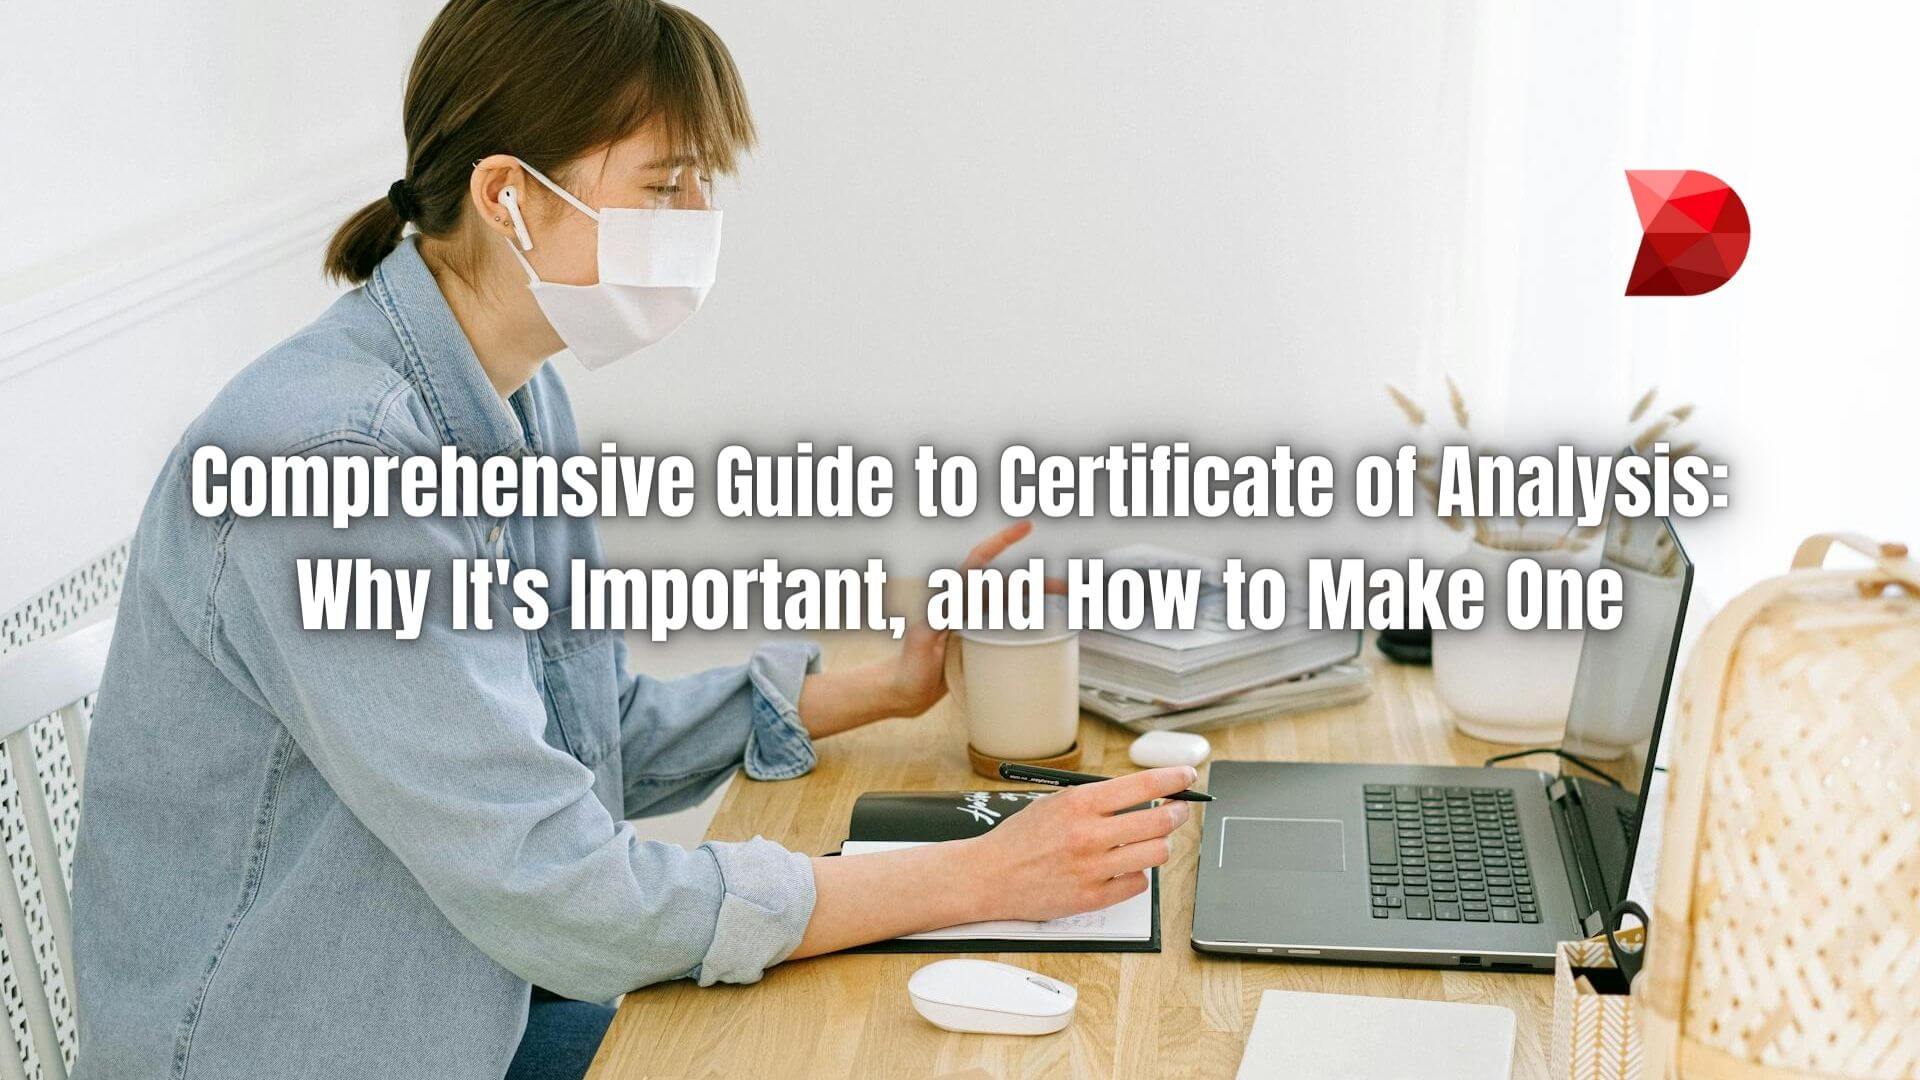 Unlock the importance of a Certificate of Analysis (COA) with our guide. Learn why it matters and master the art of creating one effectively!